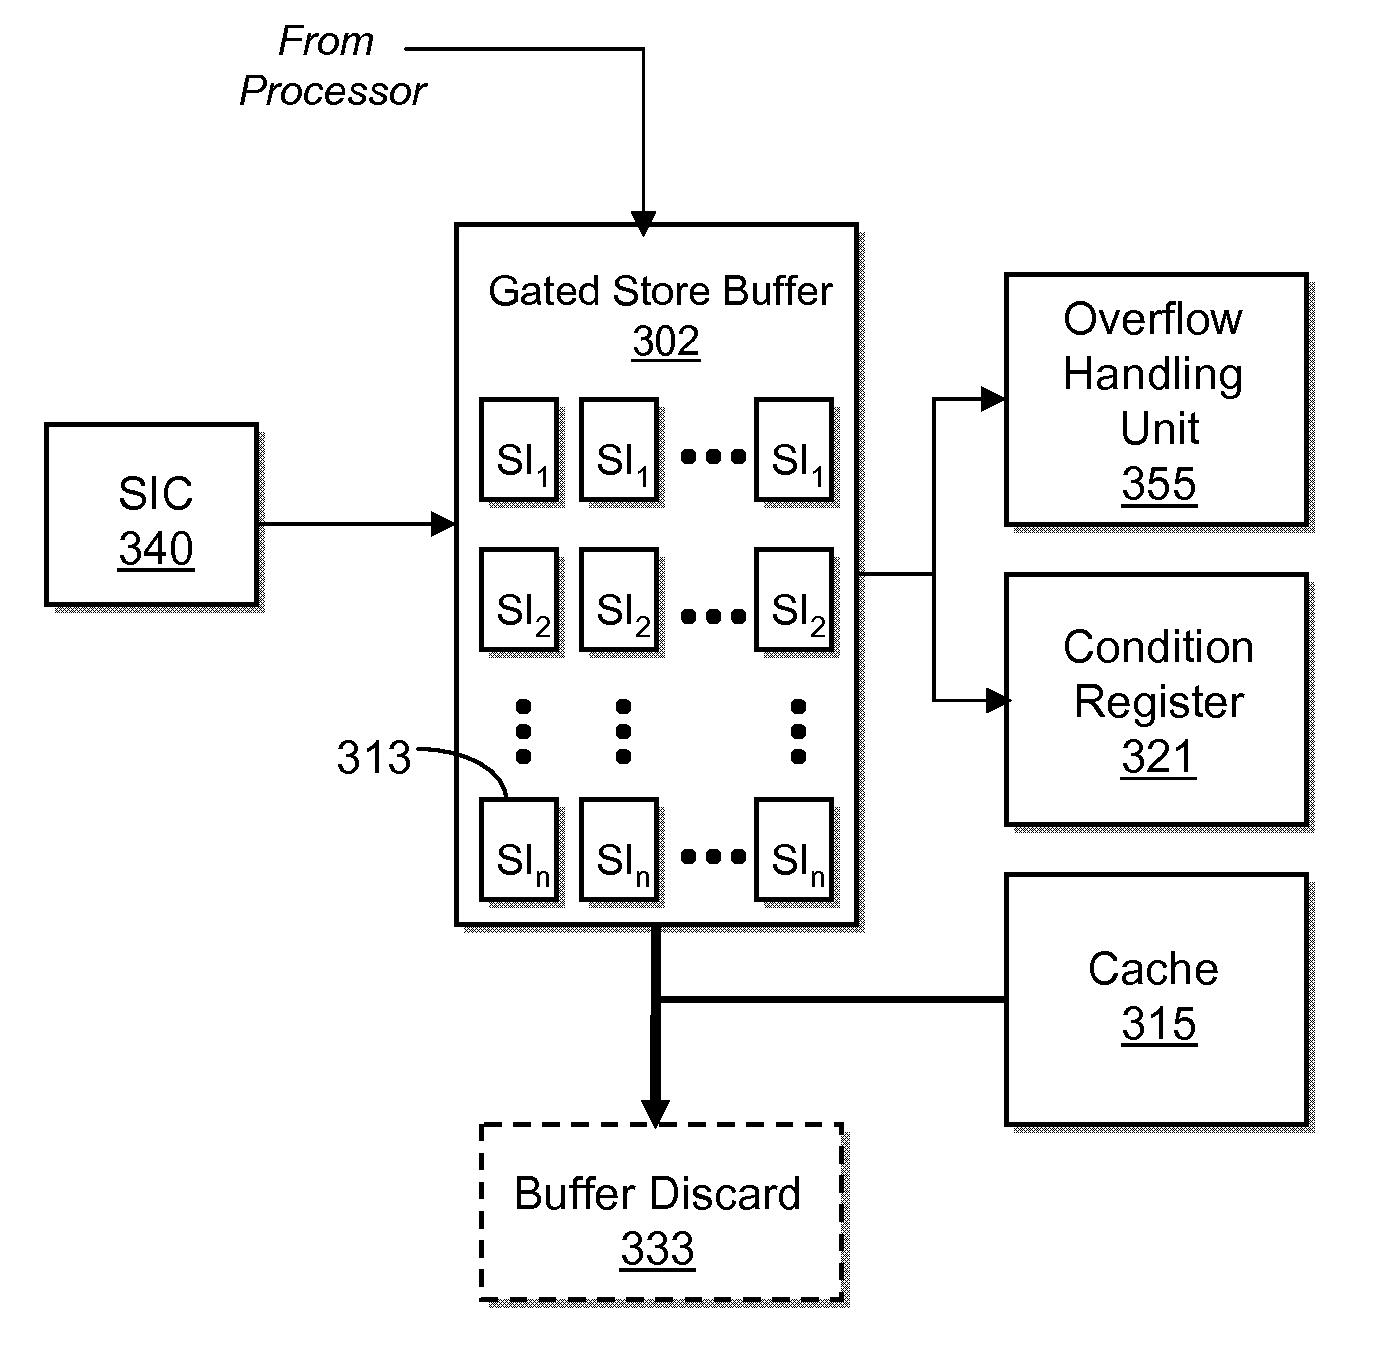 System and method for software initiated checkpoint operations